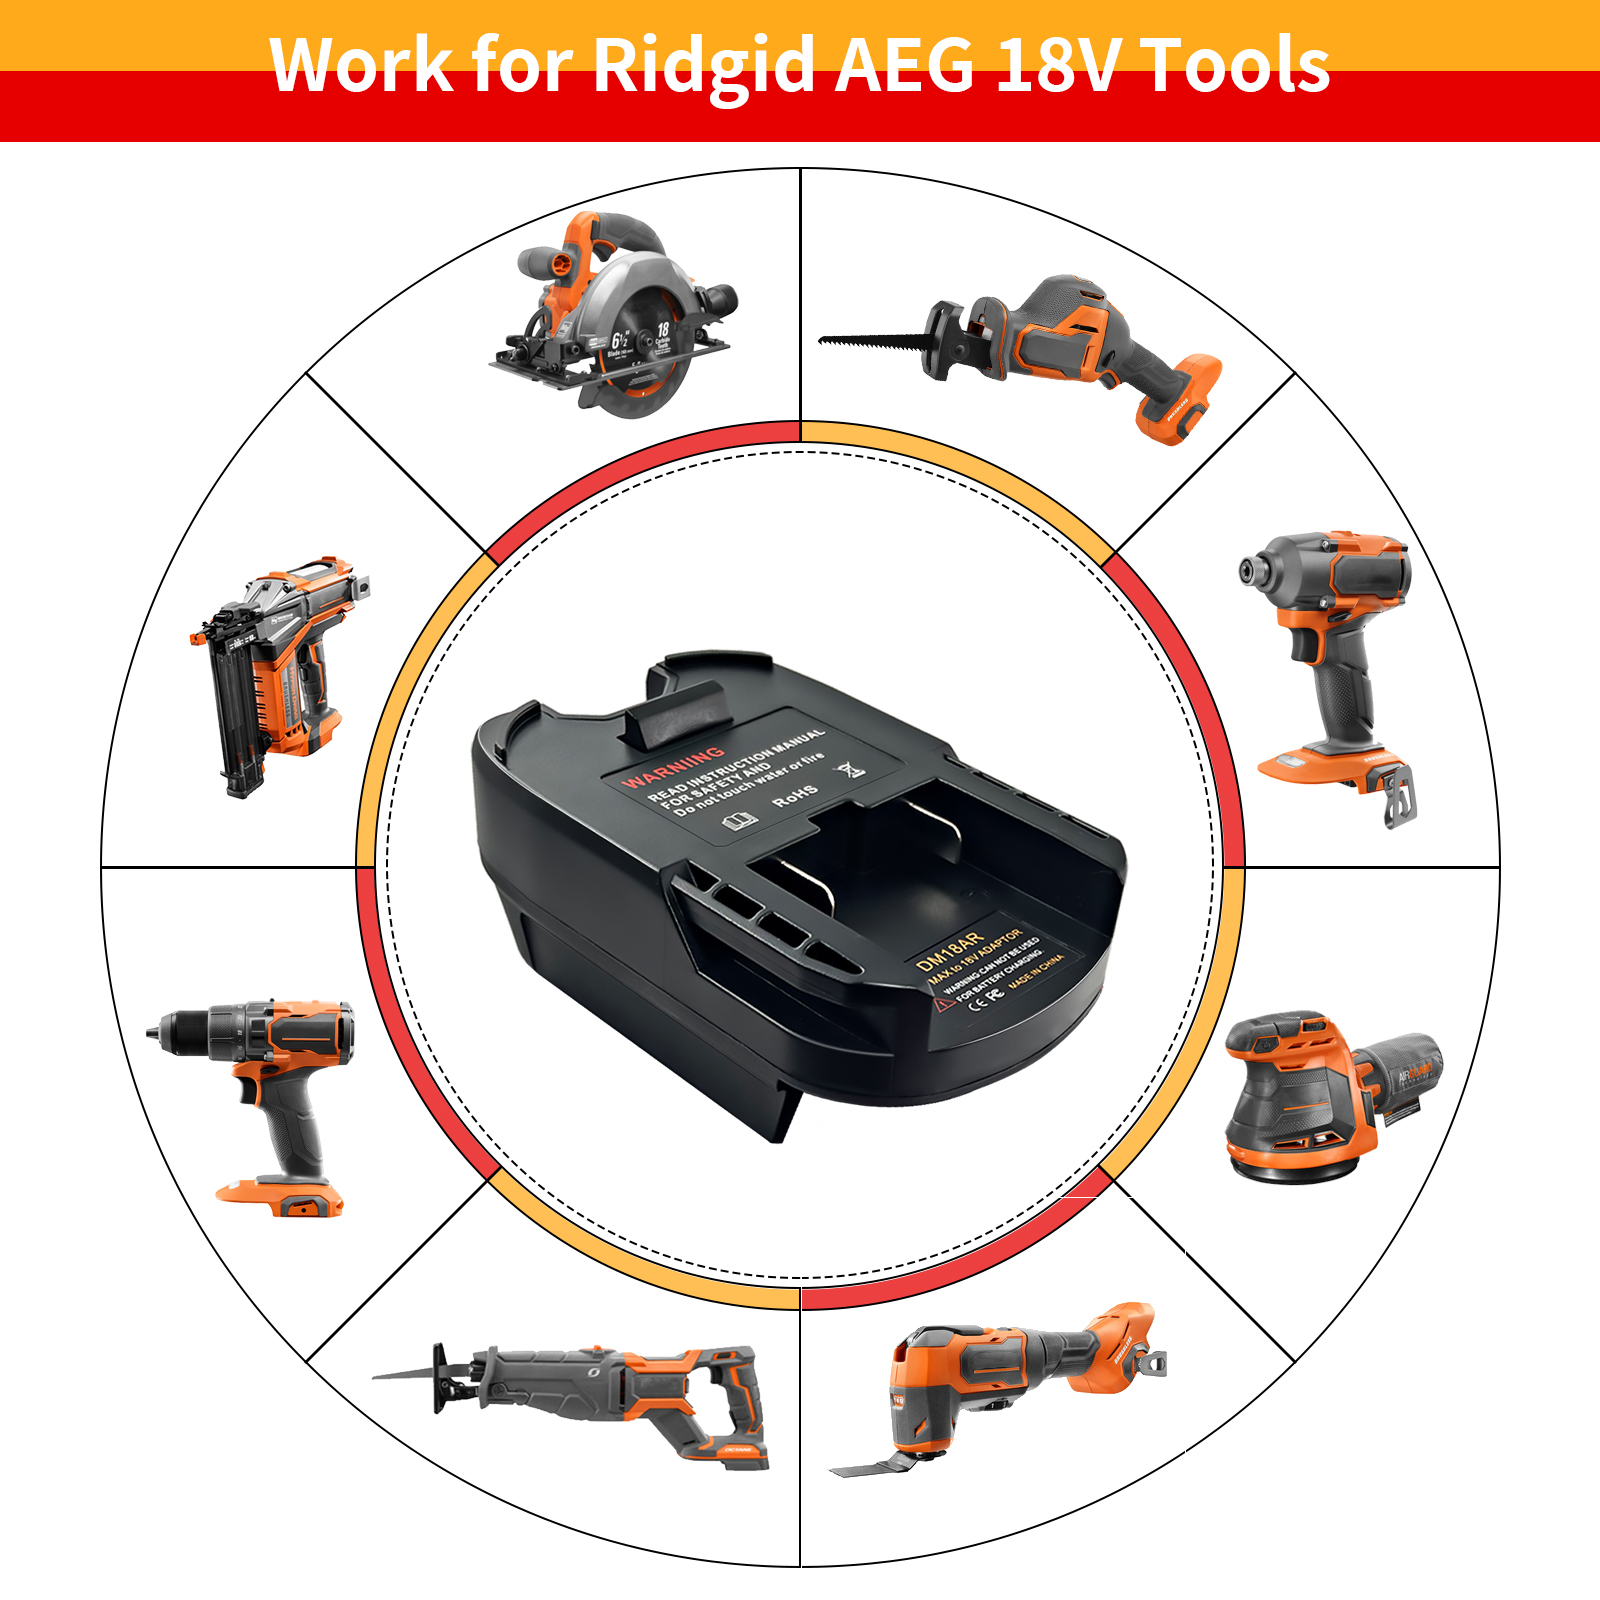 AEG 18V BATTERIES - Tools From Us